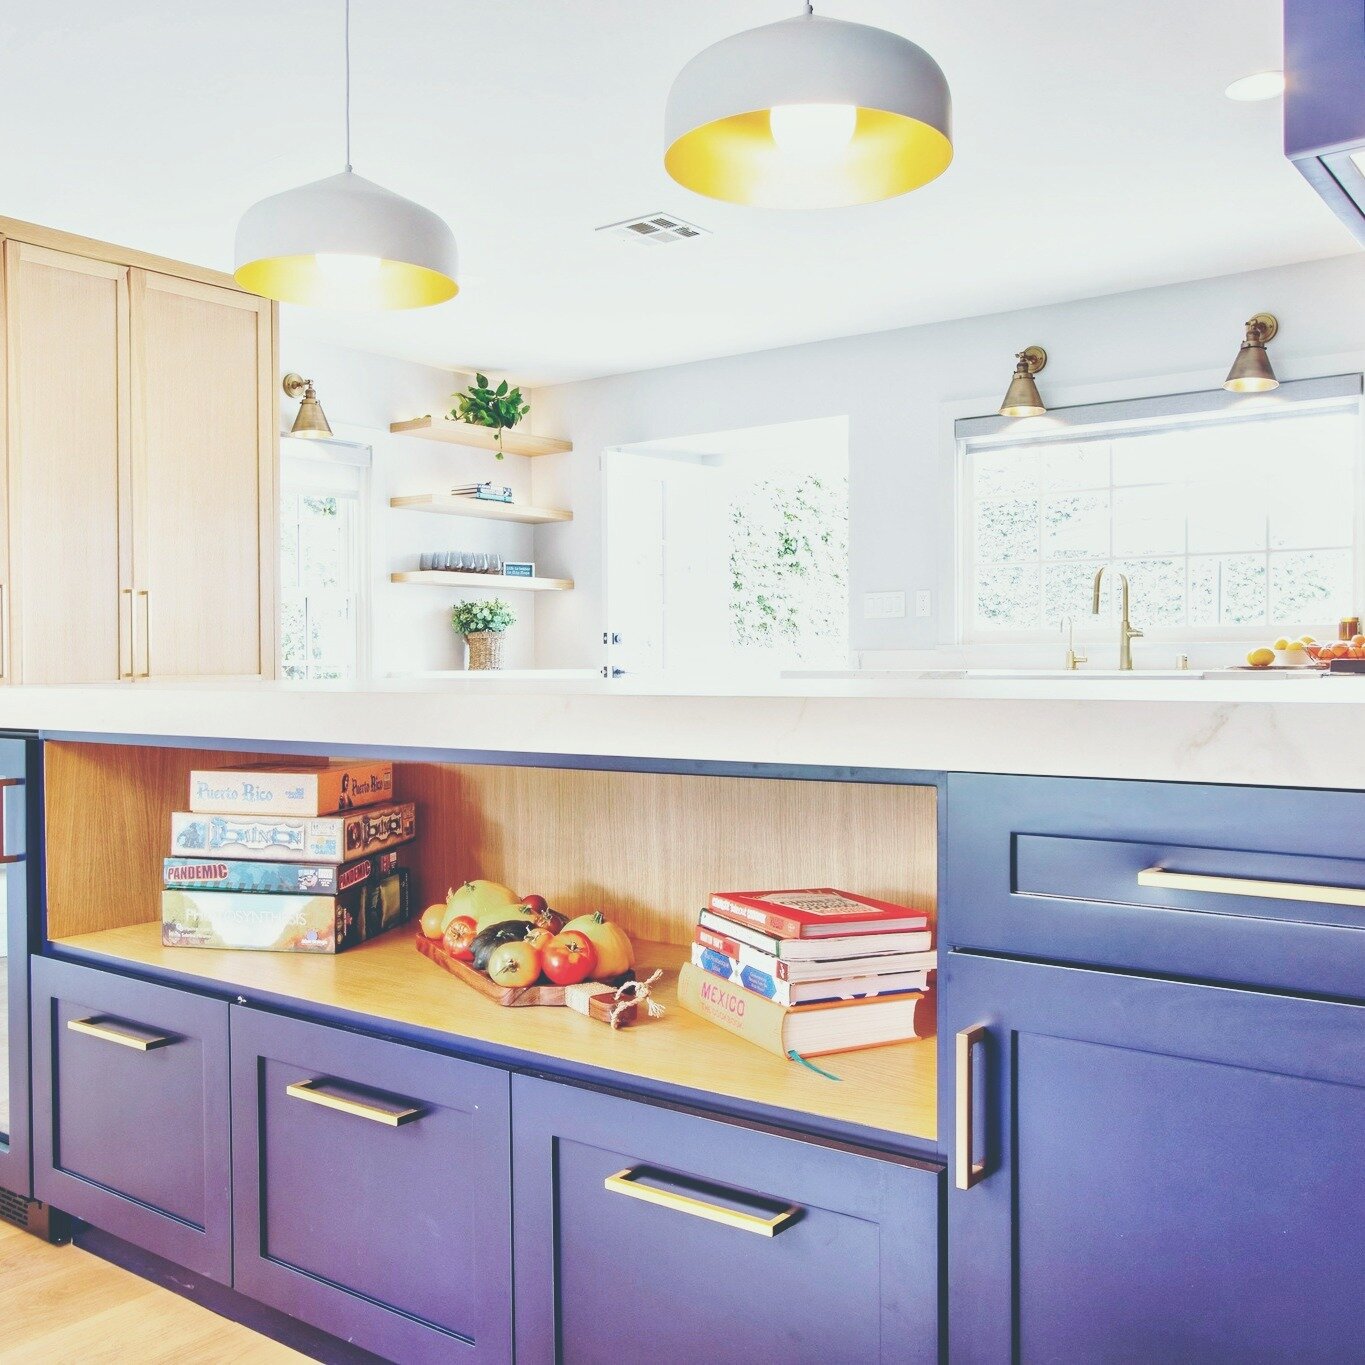 This kitchen combines #RiftOak with navy blue cabinets vs the predictable oak white combo. What other color combos do you think could work?
.
.
.
.
.
 #kitcheninspiration #kitchenrenovation #kitchenremodel #kitchendesign #interiordesignideas #modernk